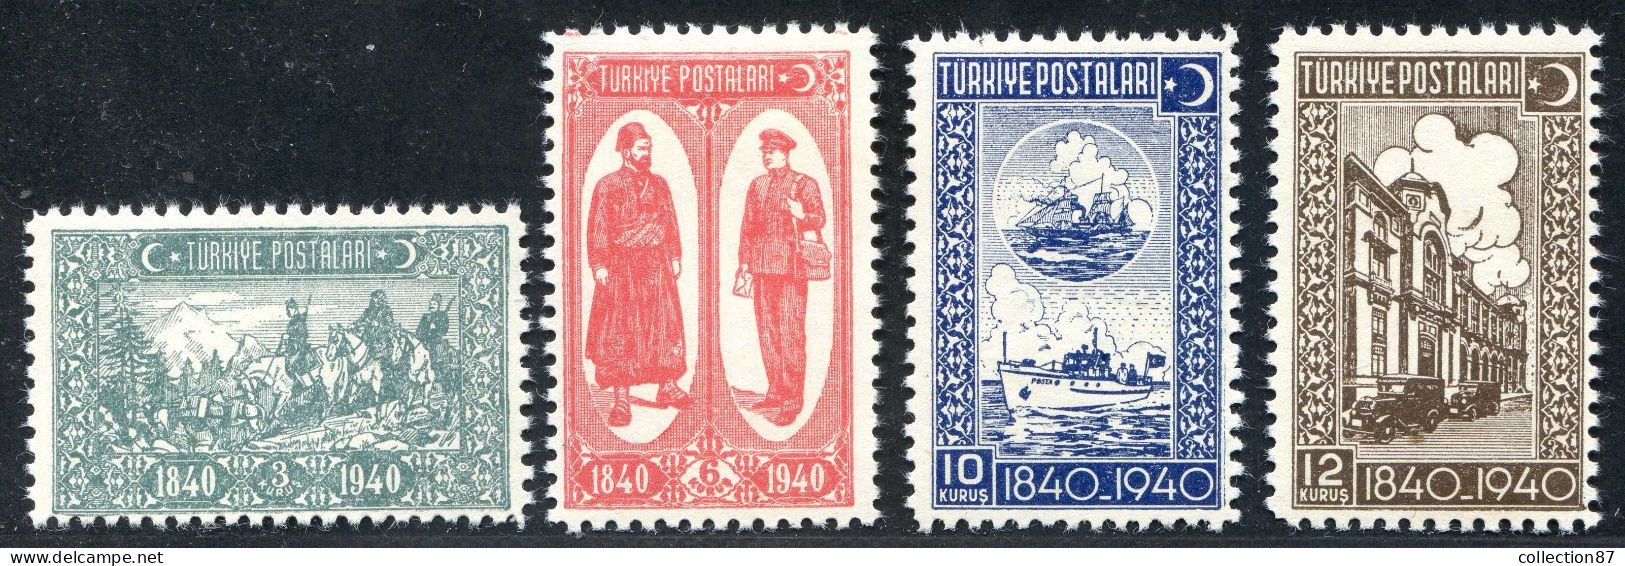 REF 091 > TURQUIE < Yv N° 947 à 950 * * < Neuf Luxe Dos Visible MNH * * Cat 6.75 € - Turkey - Unused Stamps